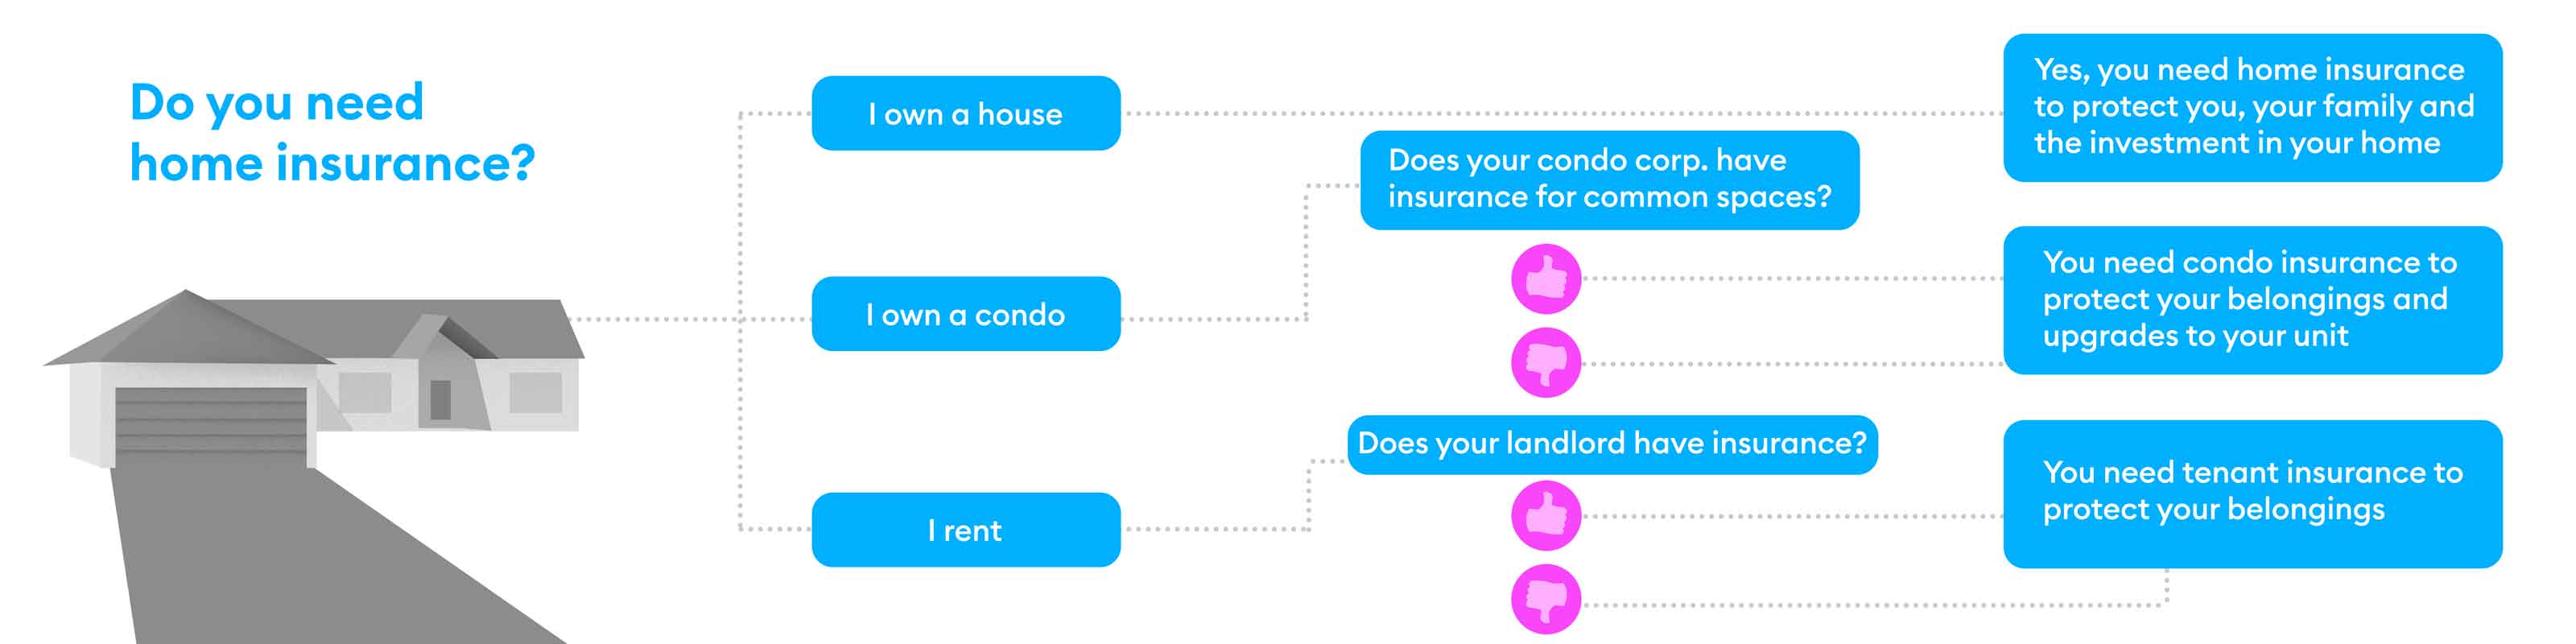 Do you need insurance flow chart 